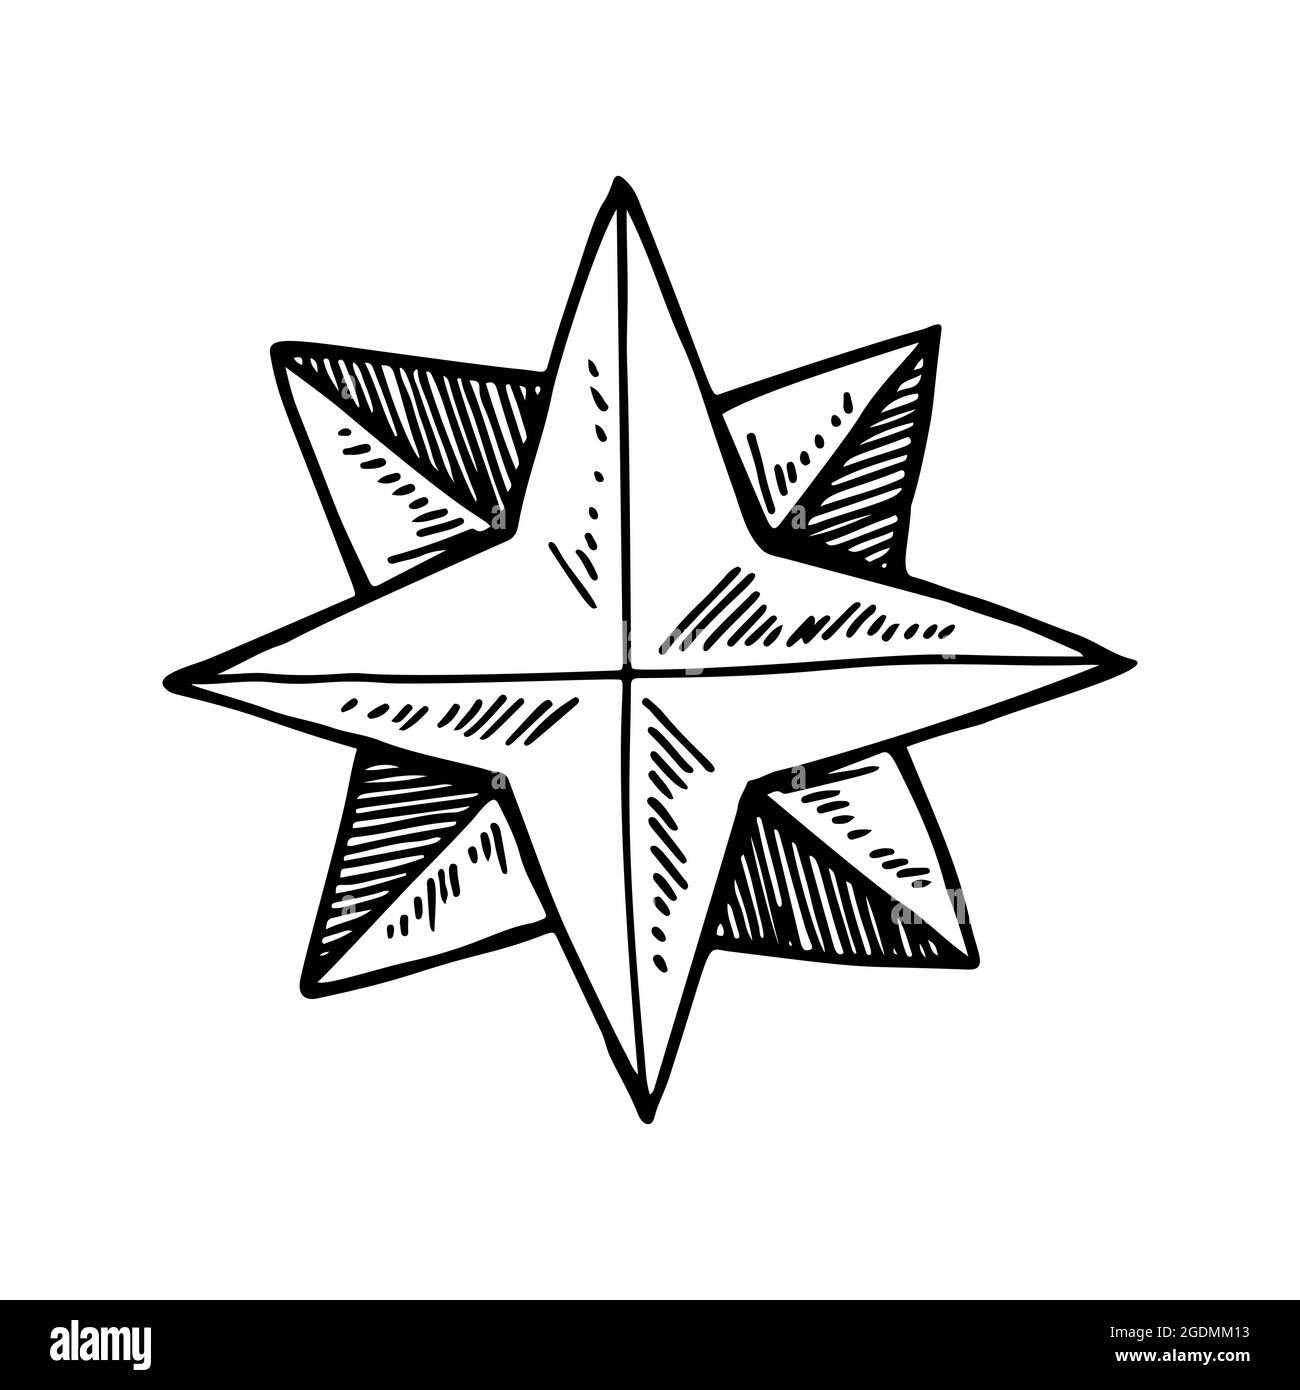 Hand drawn star. Vector illustration in sketch style Stock Vector